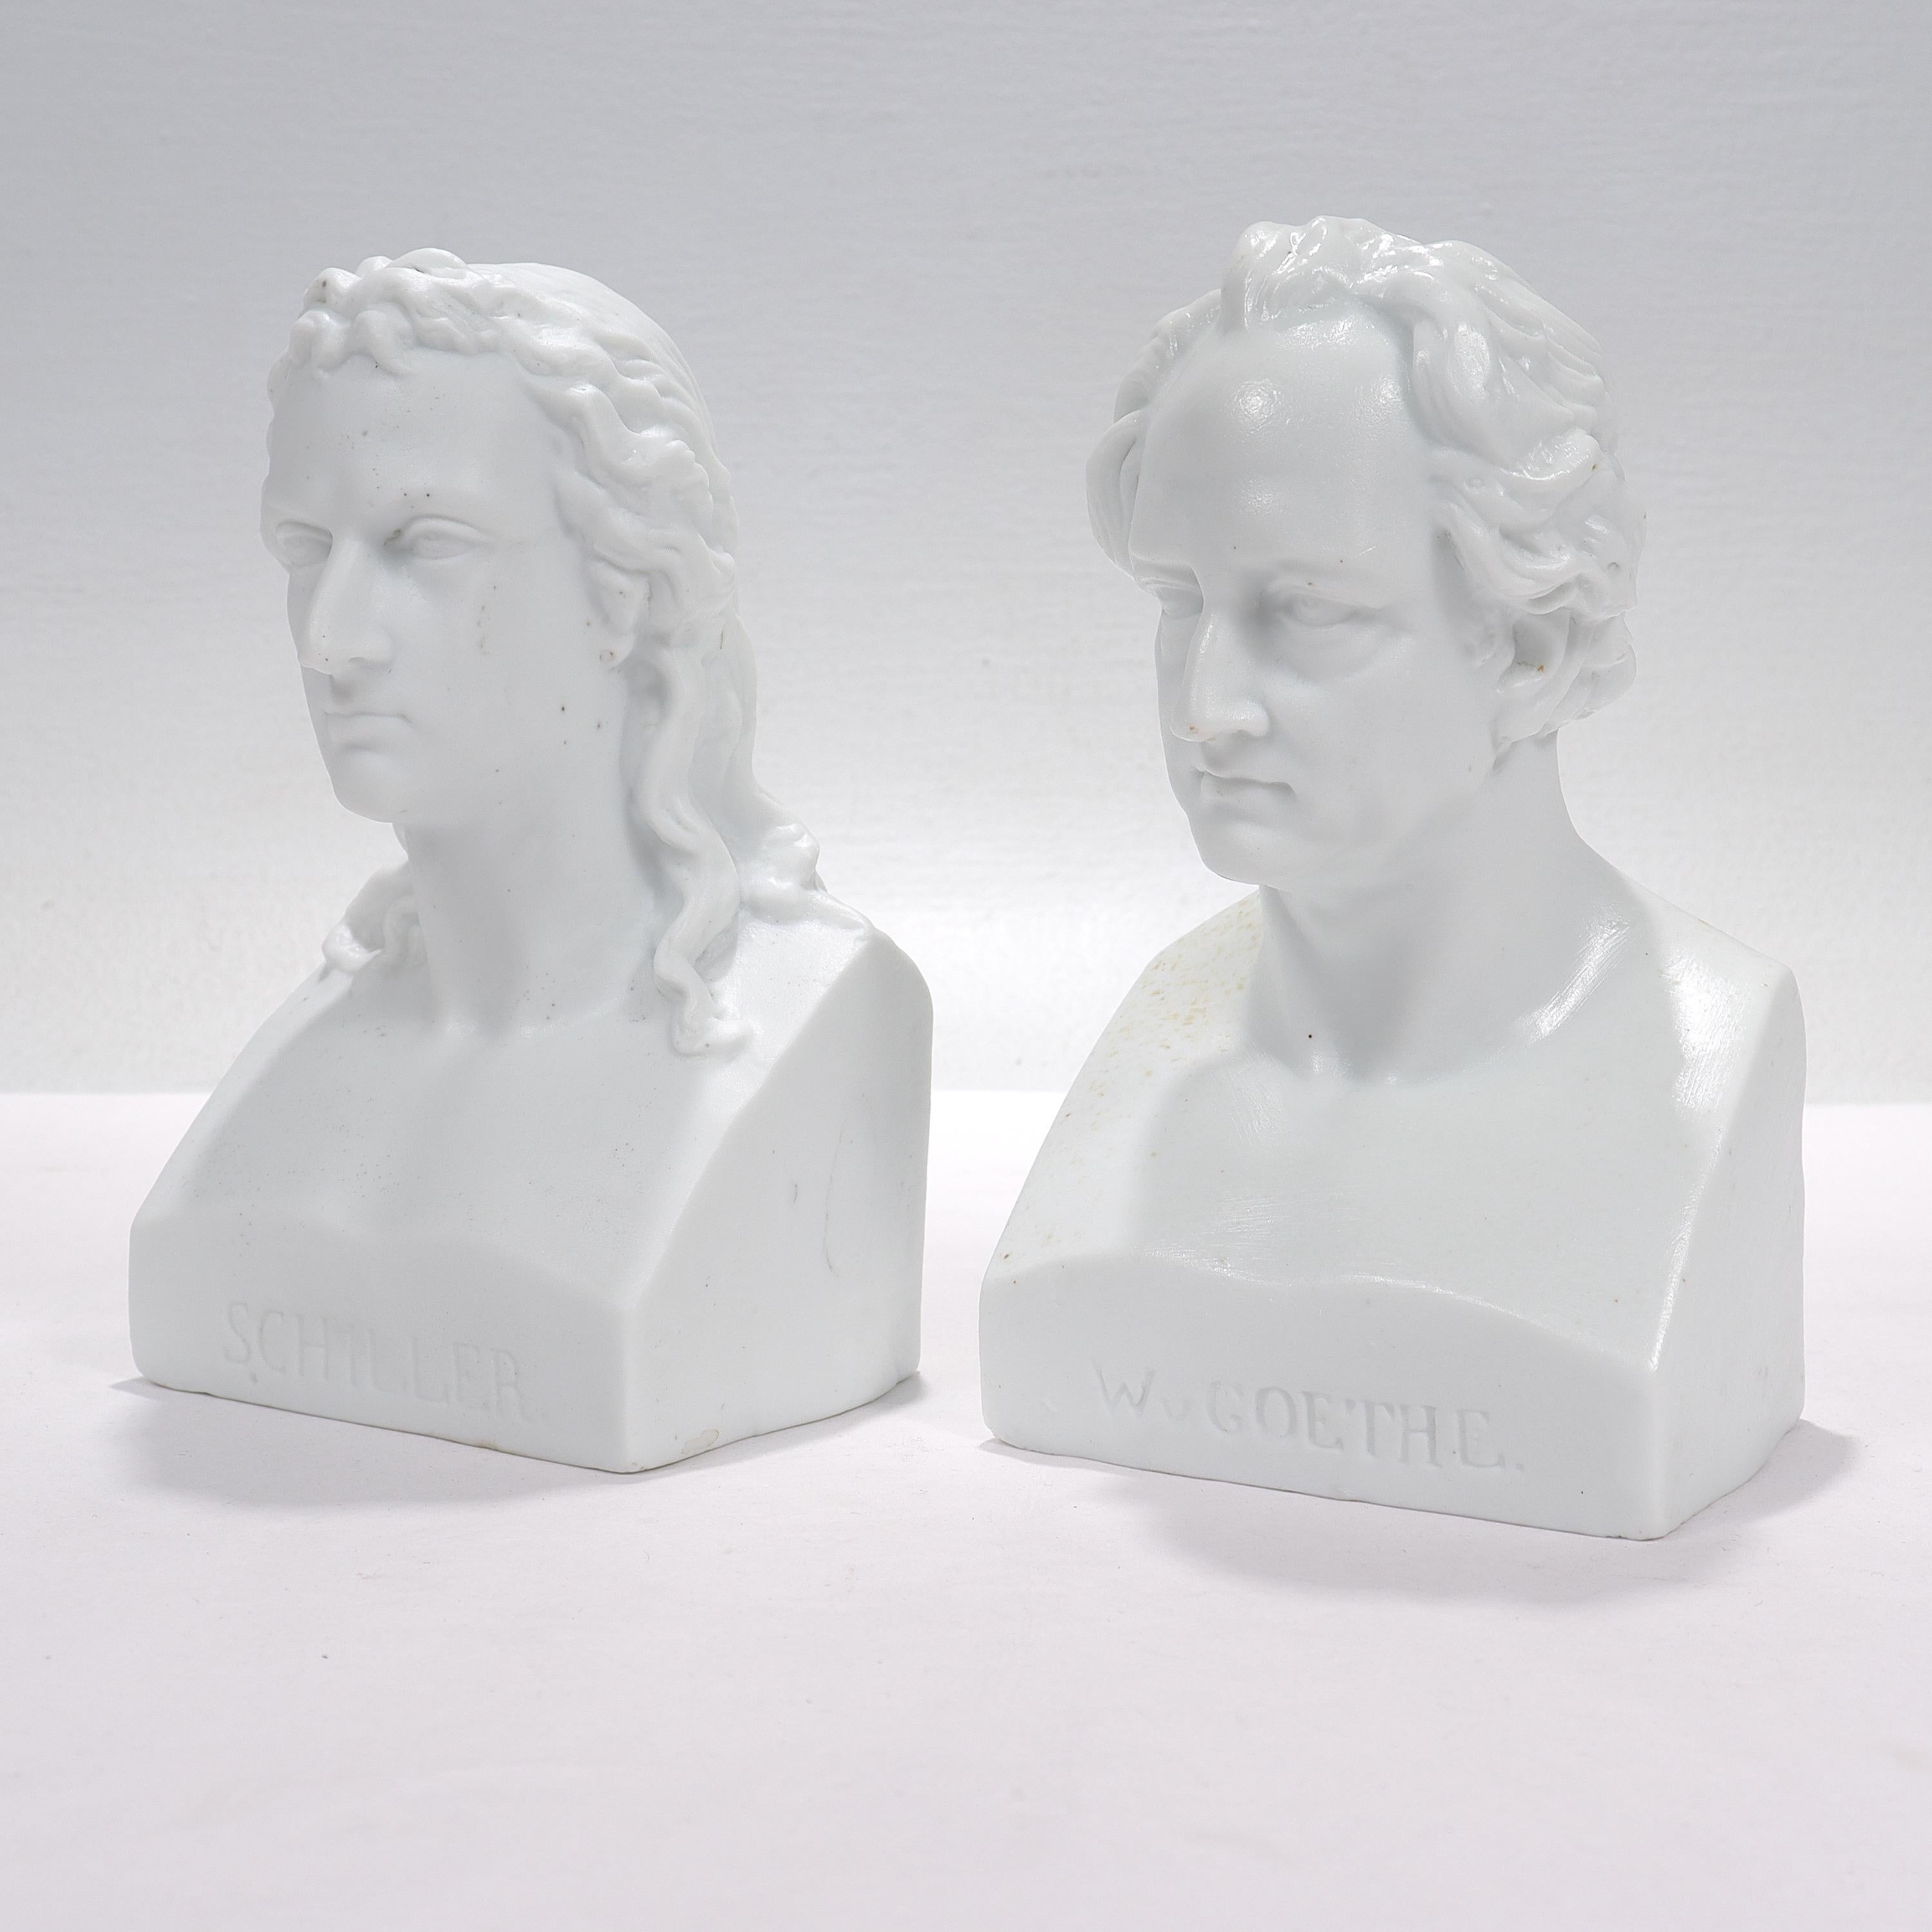 A fine pair of Cabinet sized busts.

In parian or bisque porcelain.

Depicting Friedrich Schiller and Johann Wolfgang Goethe, two of the most revered figures in German literature.

The Schiller bust is modeled after the Johann Heinrich Dannecker's